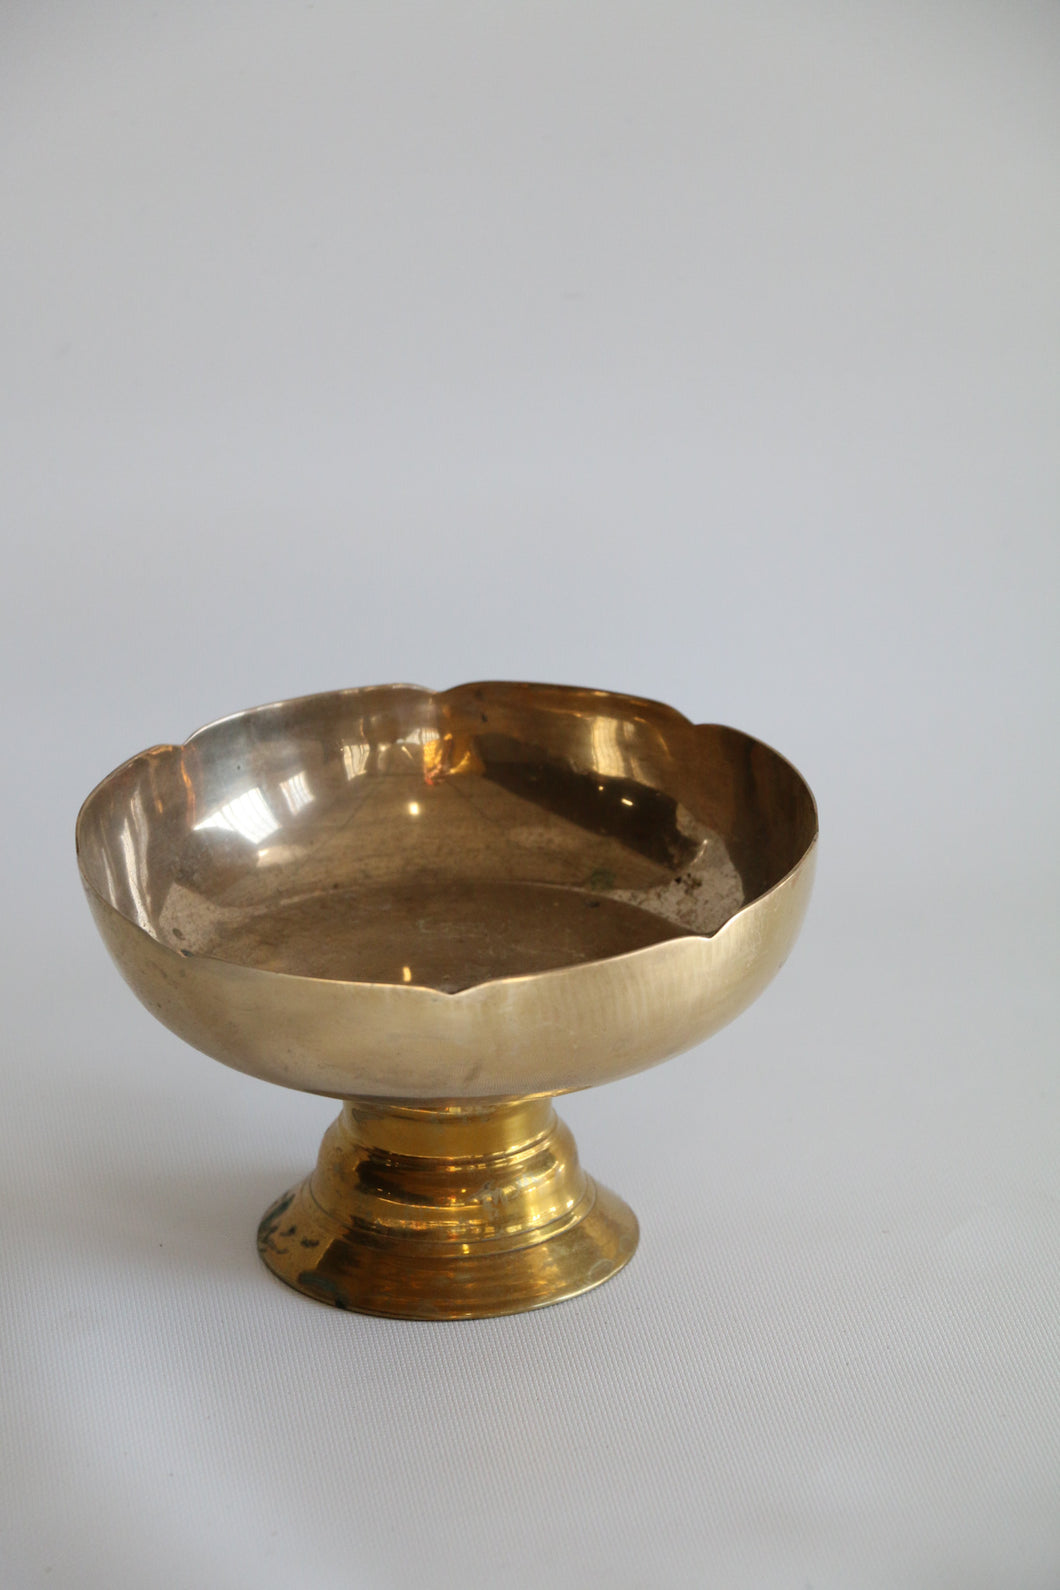 Vintage Scalloped Brass Footed Bowl